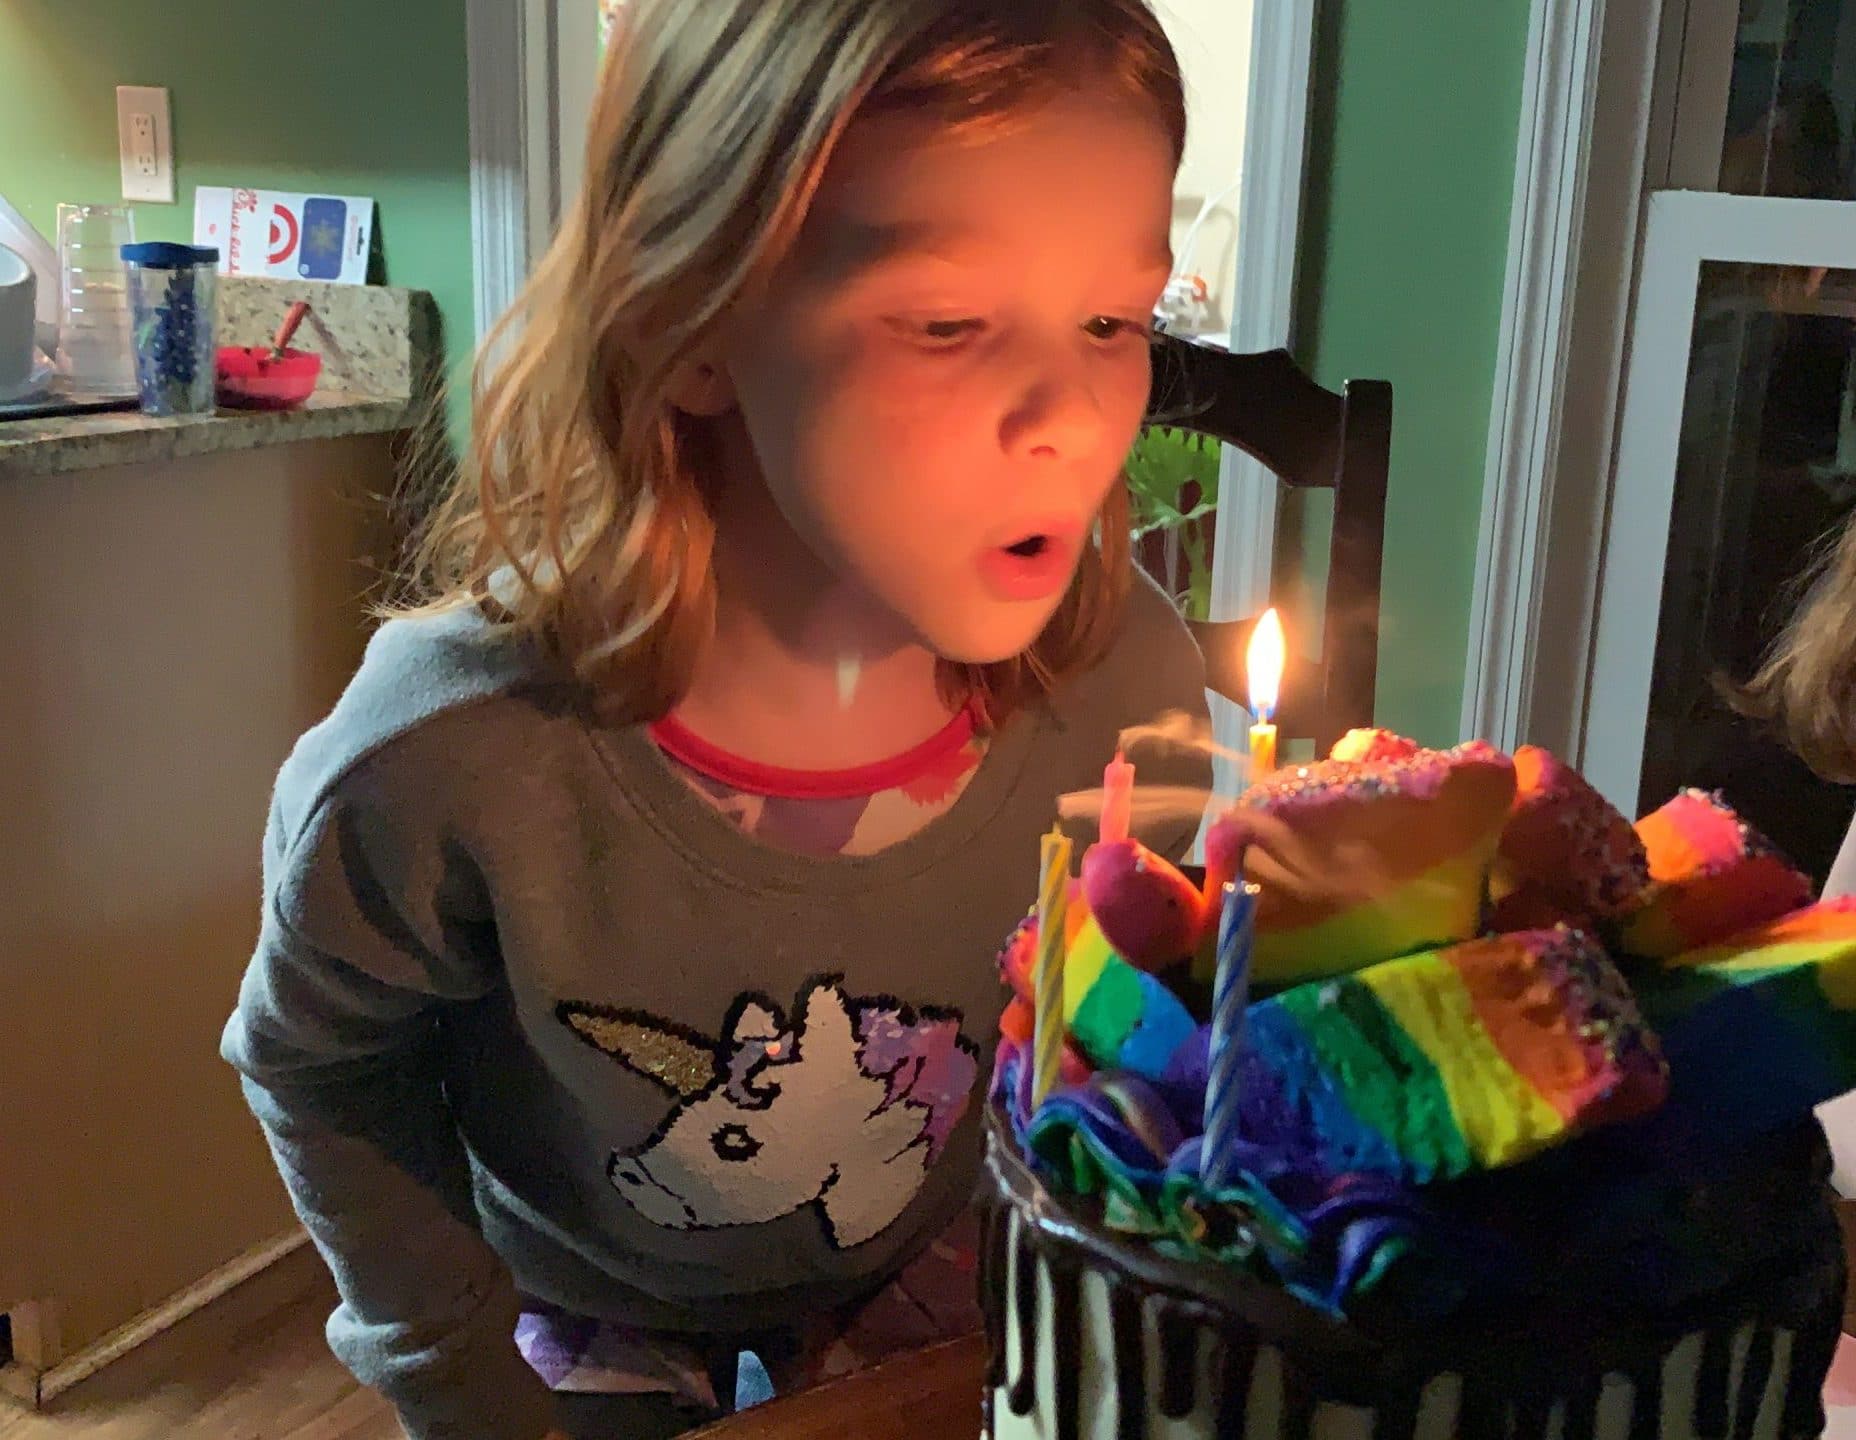 Happy 7th birthday B with candles and cake